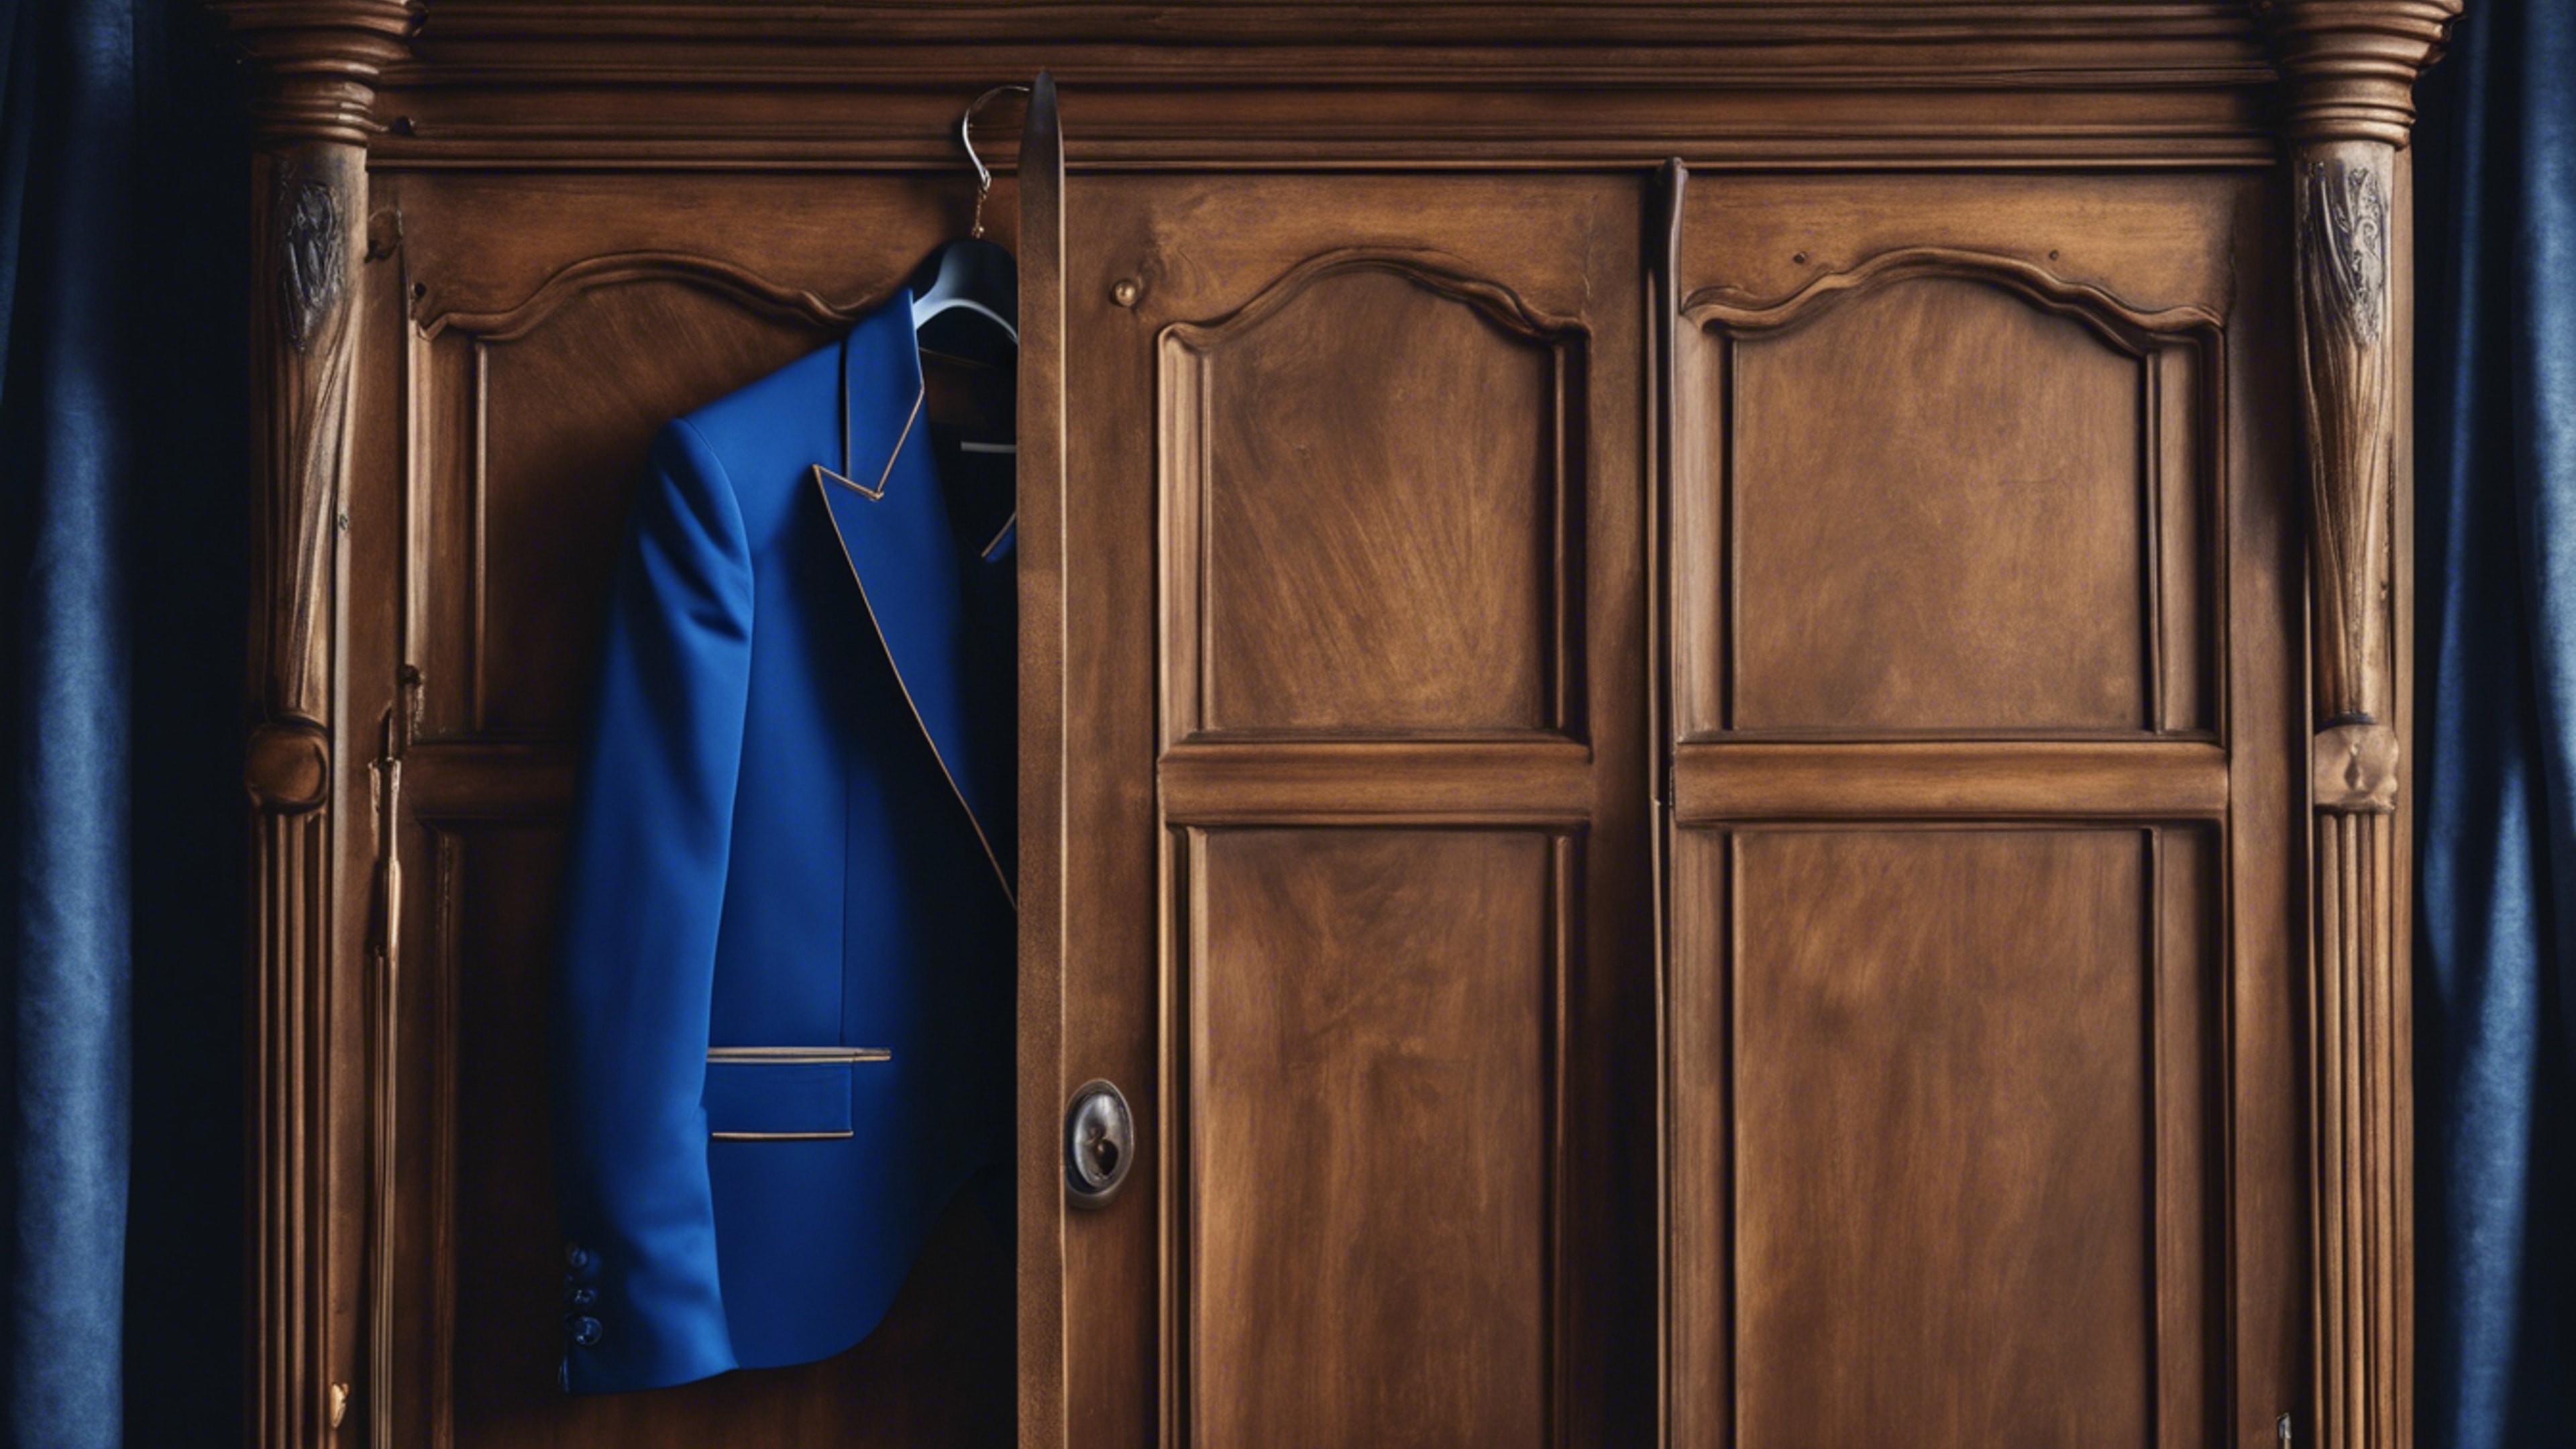 A vintage royal blue tuxedo hanging in a classic antique wardrobe. Tapet[1e18aa866c984257b969]